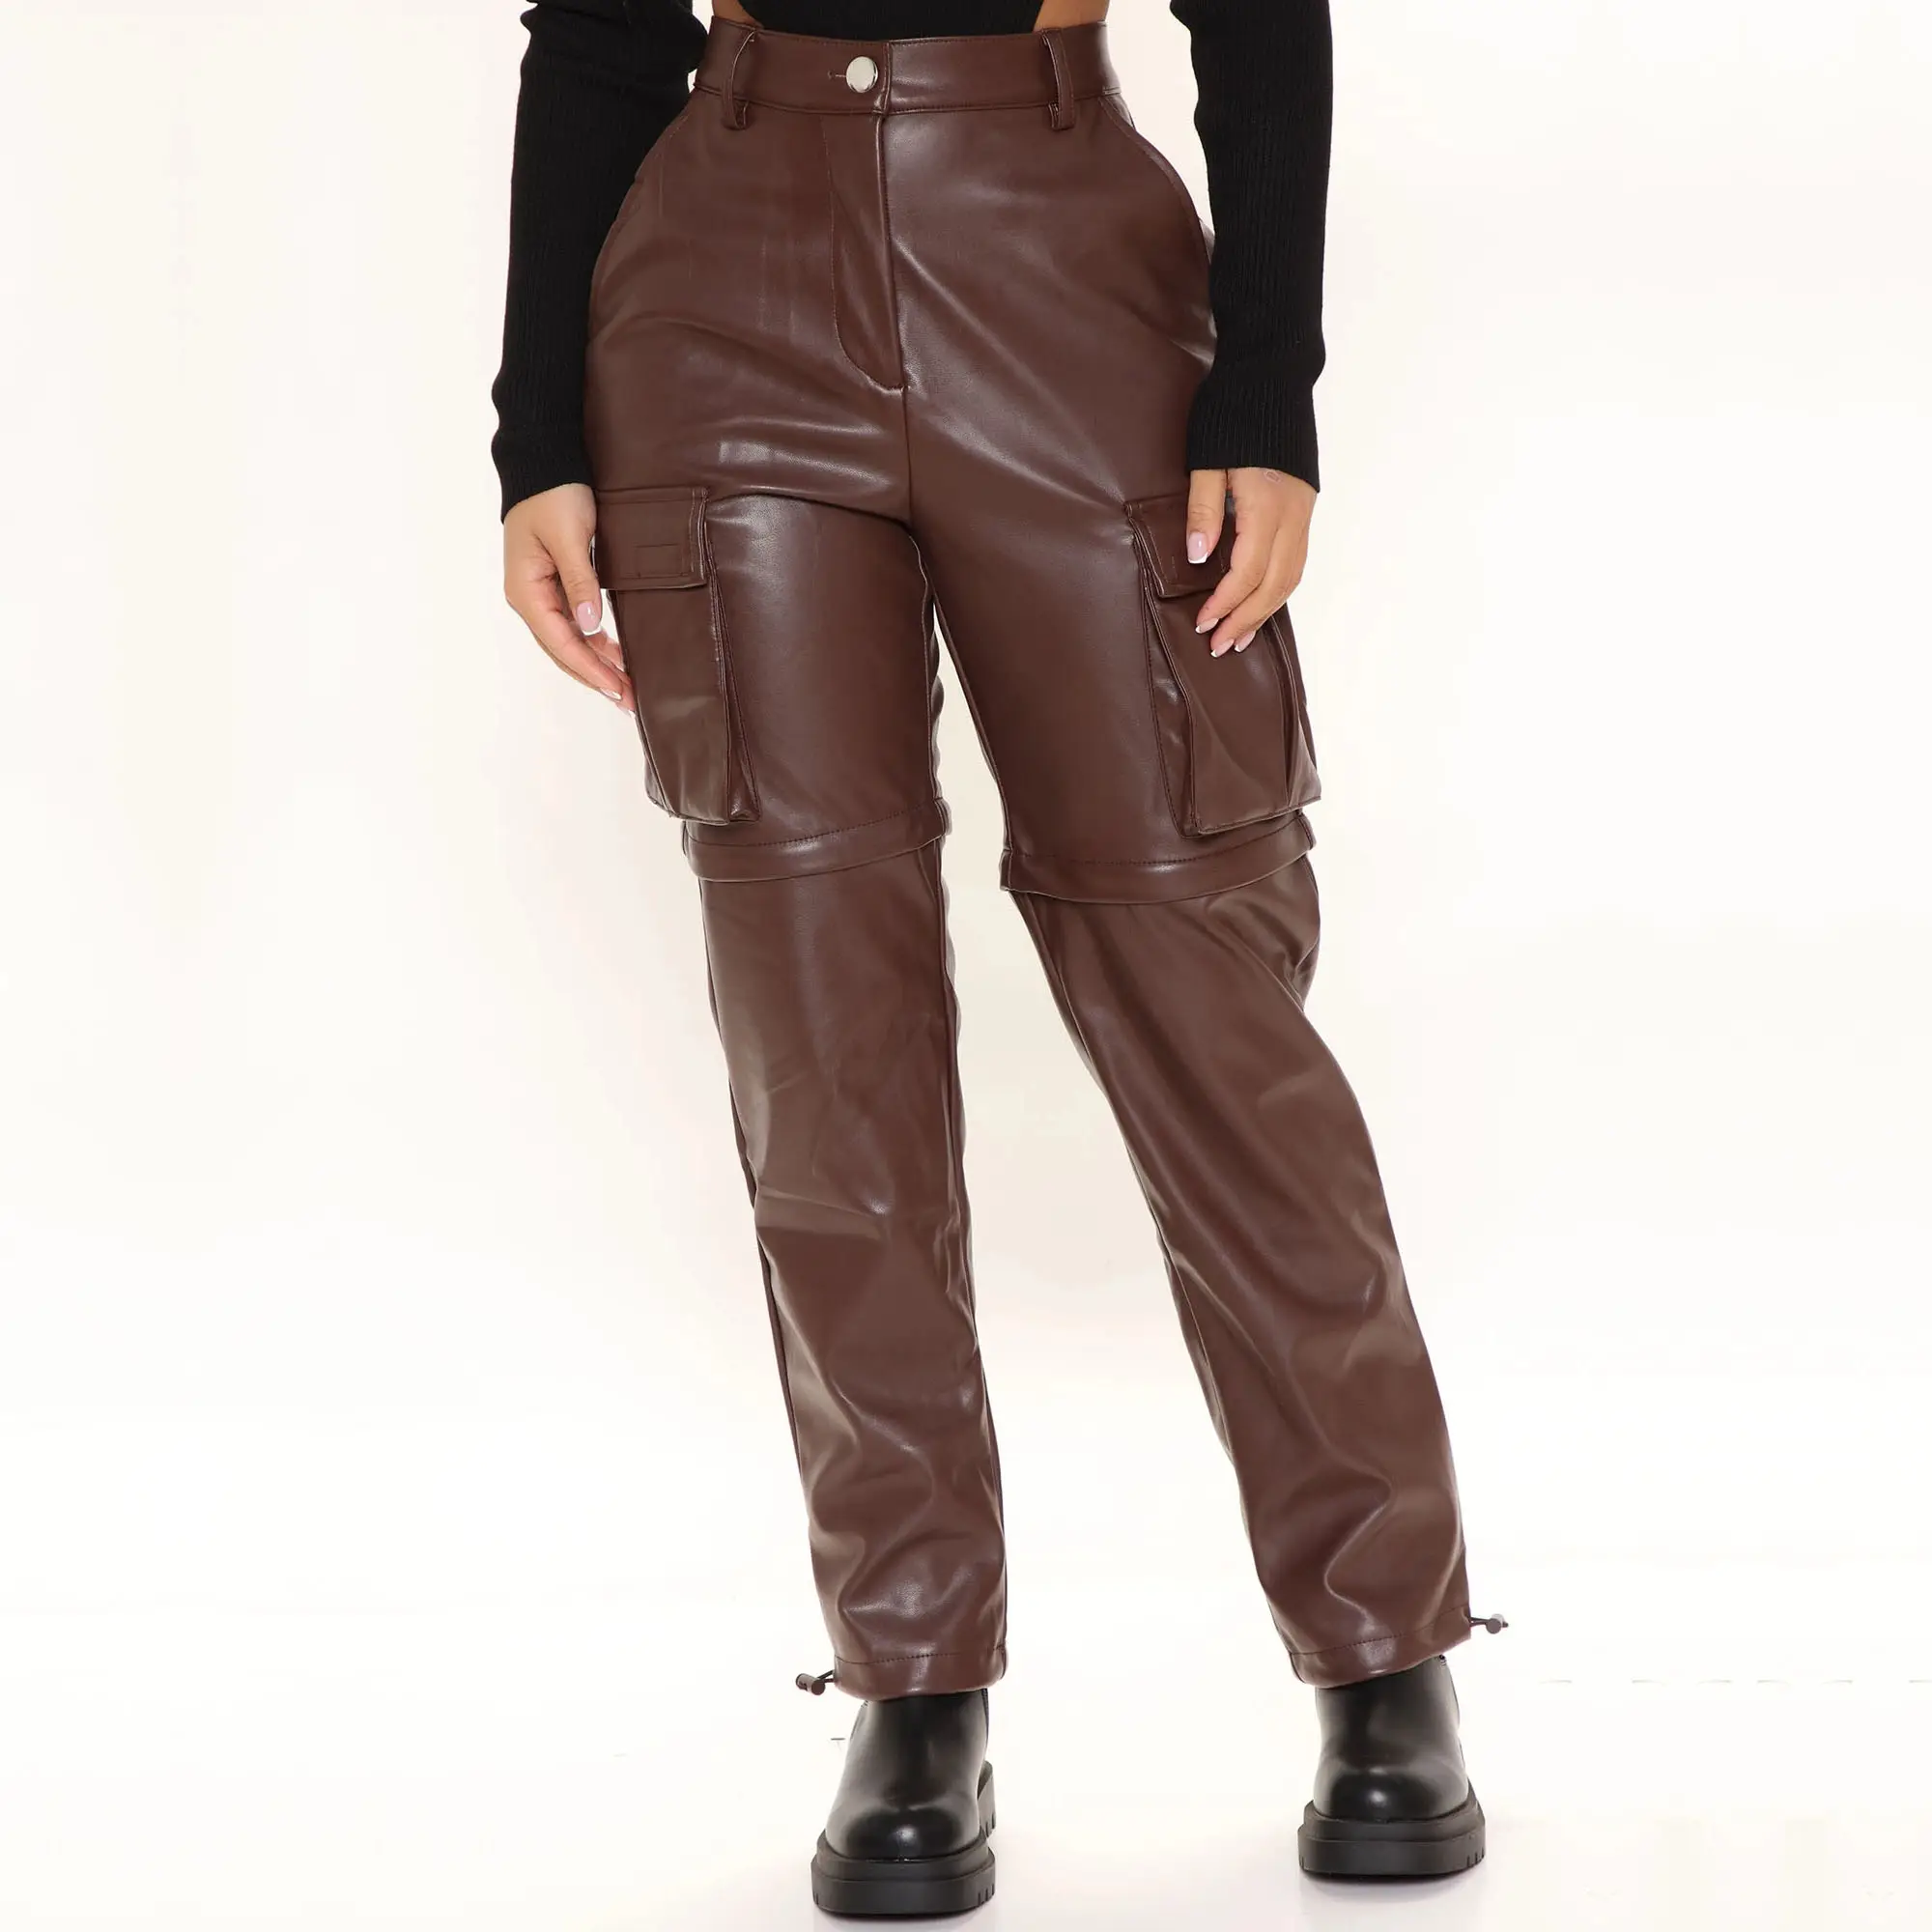 Cargo Leather Pants Women For Wholesale Fashionable Clothes Factory Price To Custom High Quality Brown Faux PU Leather Pants